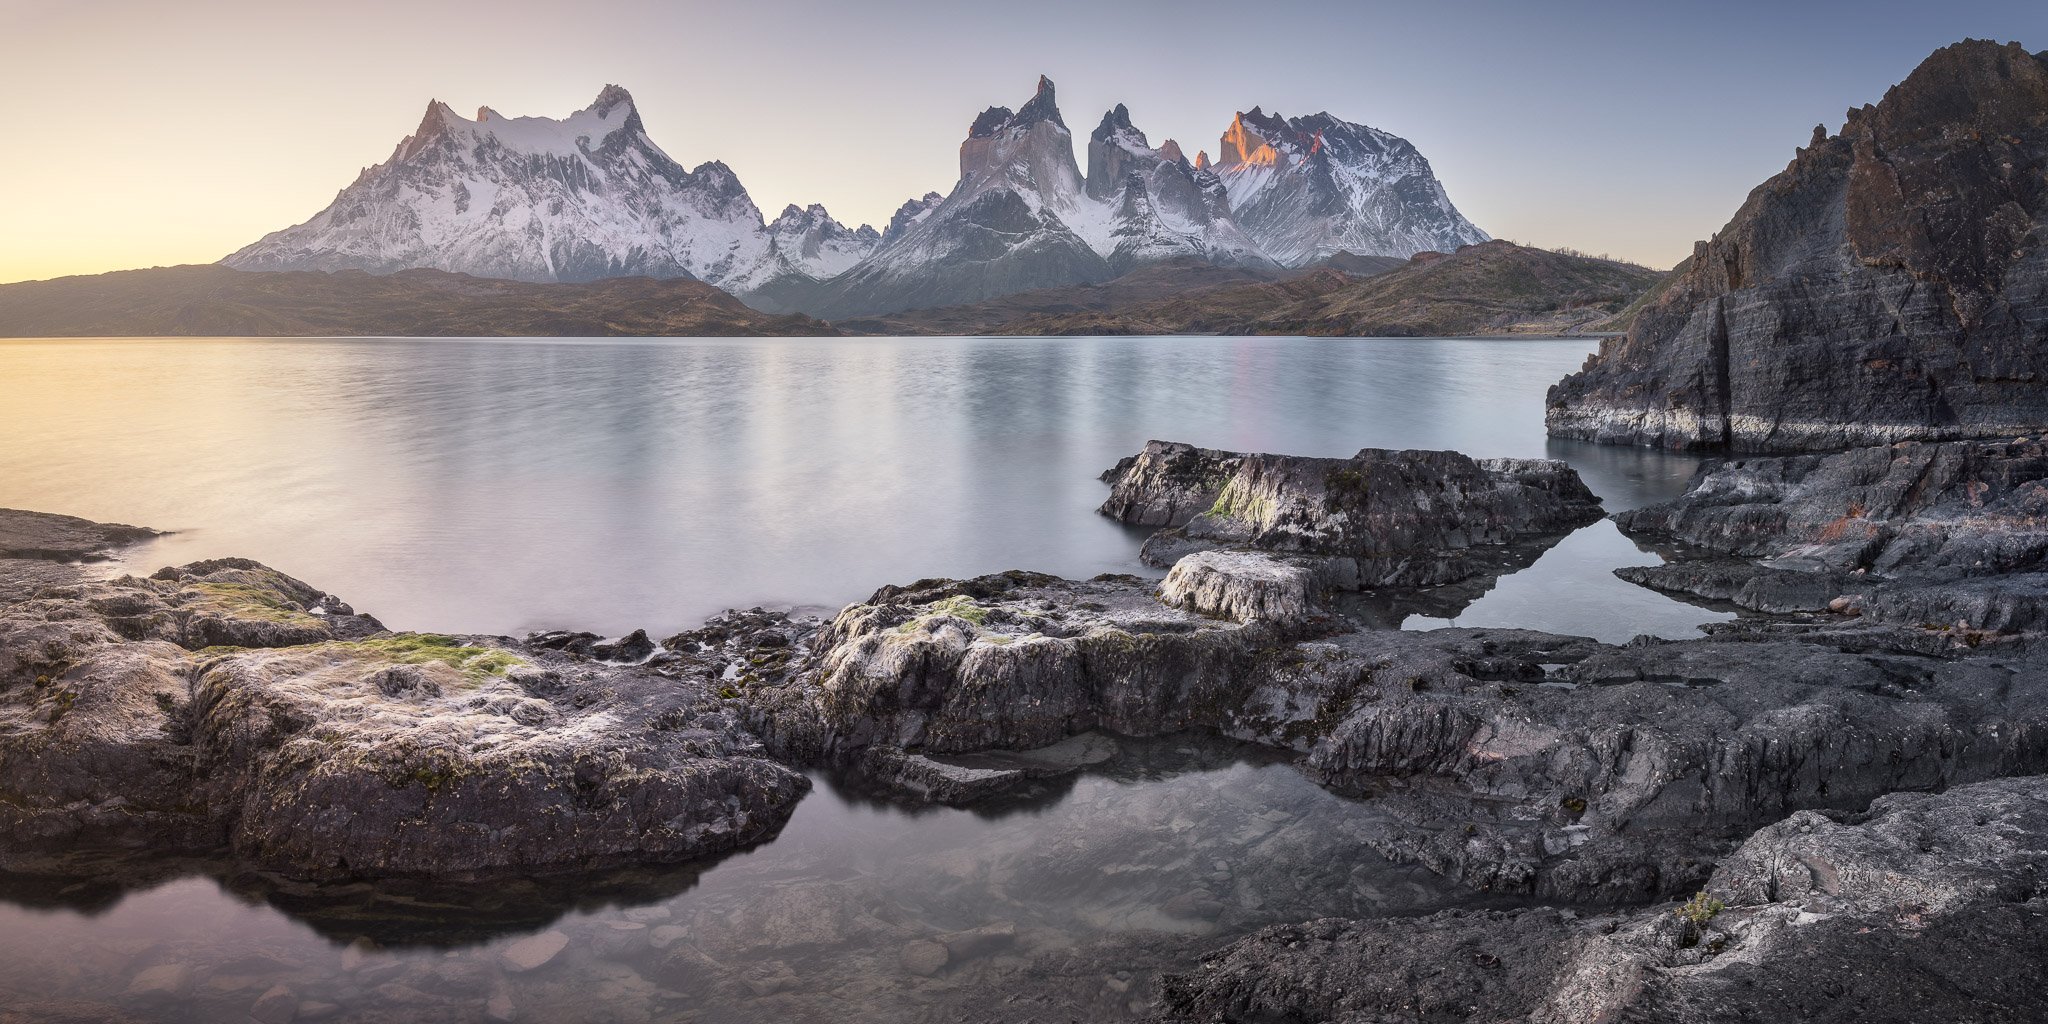 america, andes, basalt, blue, calm, chile, cliff, cuernos, del, dramatic, evening, hiking, history, island, lago, lake, landmark, landscape, light, mountain, national, nature, outdoor, paine, pano, panorama, panoramic, park, patagonia, peak, pehoe, range,, Andrey Omelyanchuk